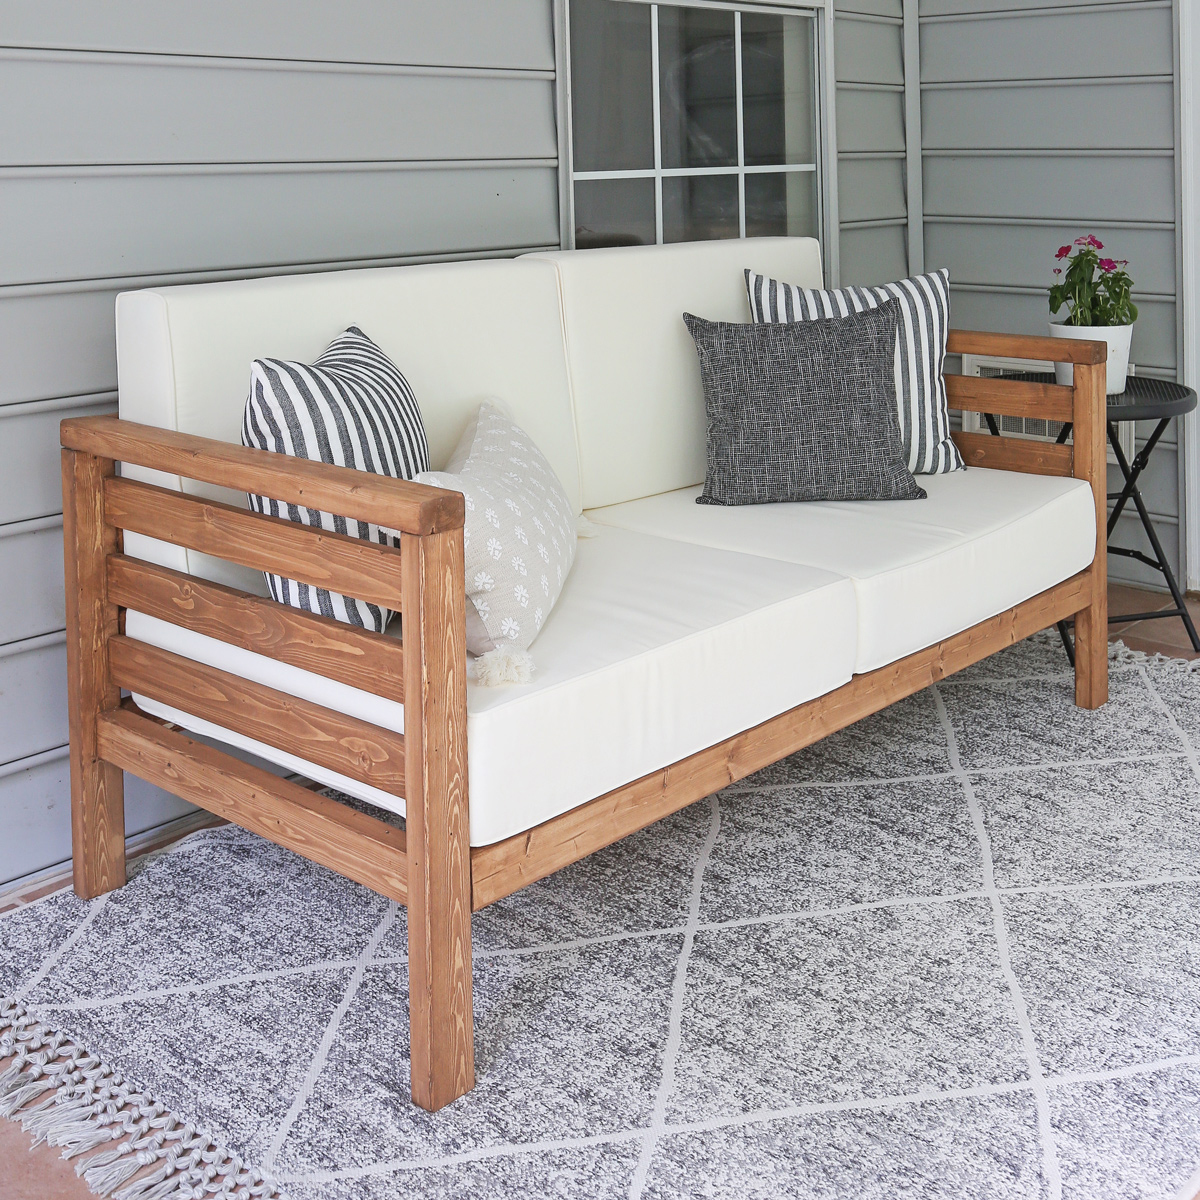 Diy Outdoor Couch Angela Marie Made, Outdoor Sofa Plans Free